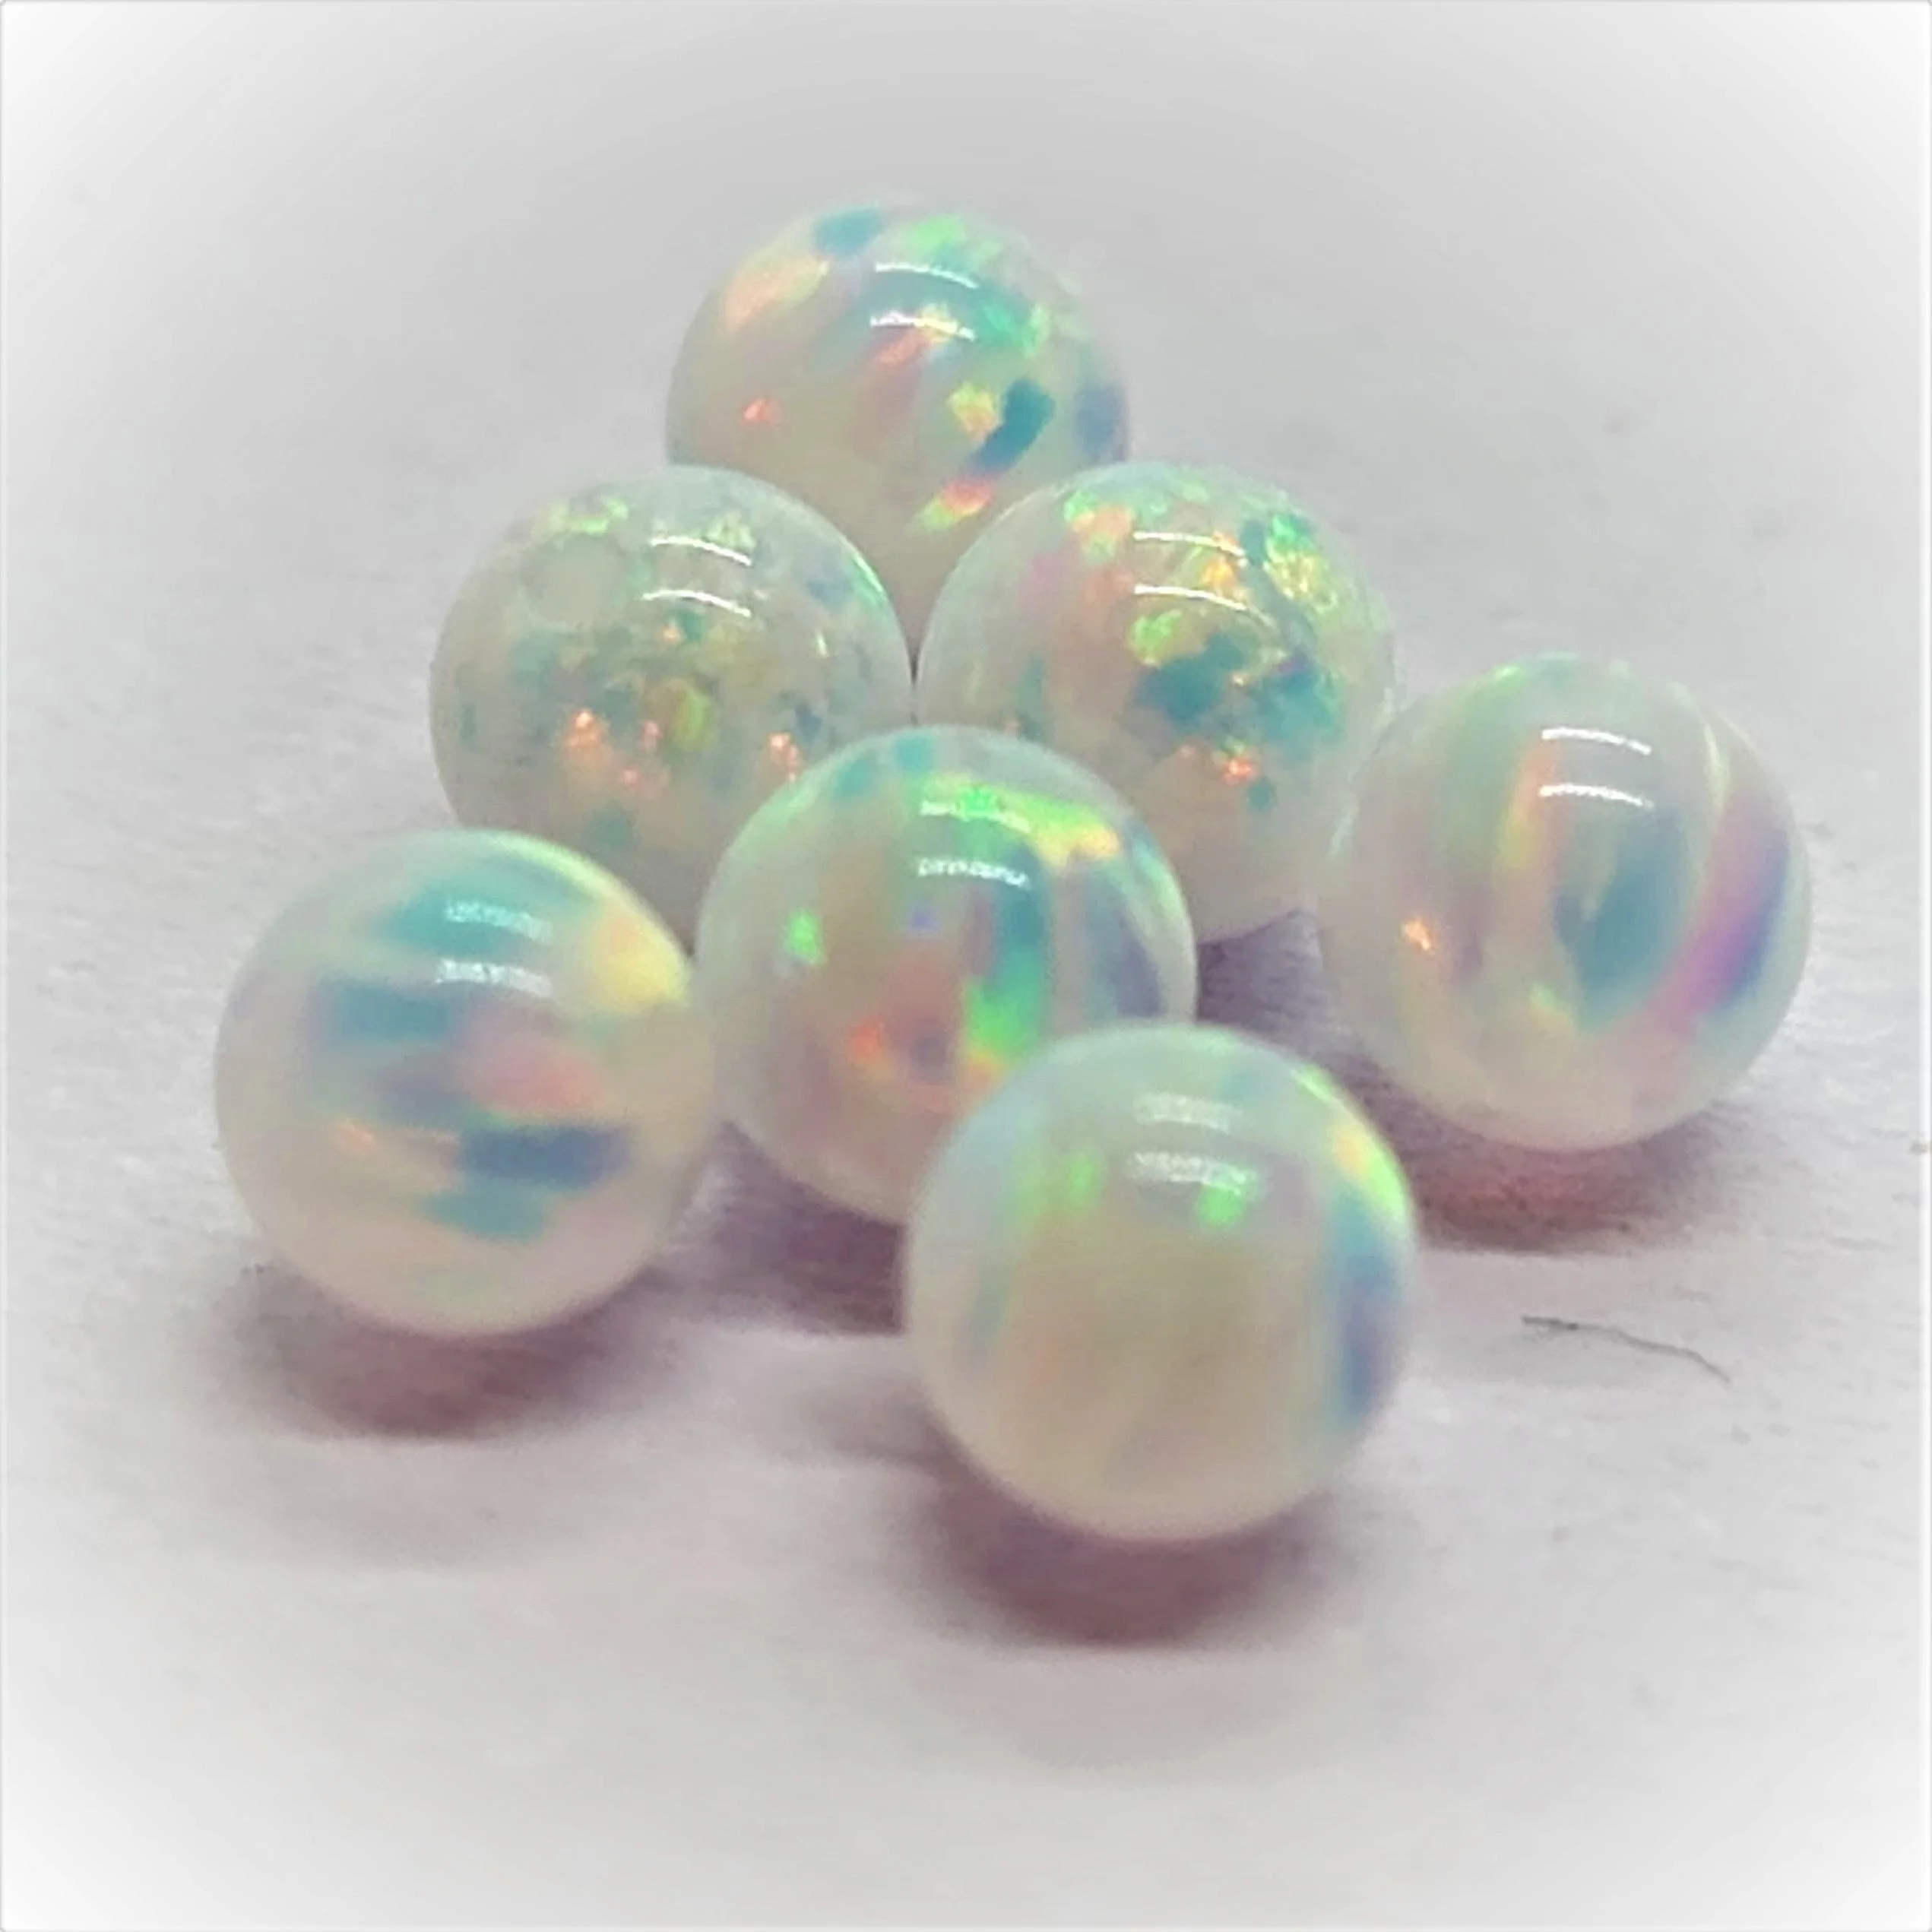 Loose Gemstone Synthetic Opal Ball Shaped Beads cut in all sizes till 15mm in other shapes and sizes as well (10000001151217)